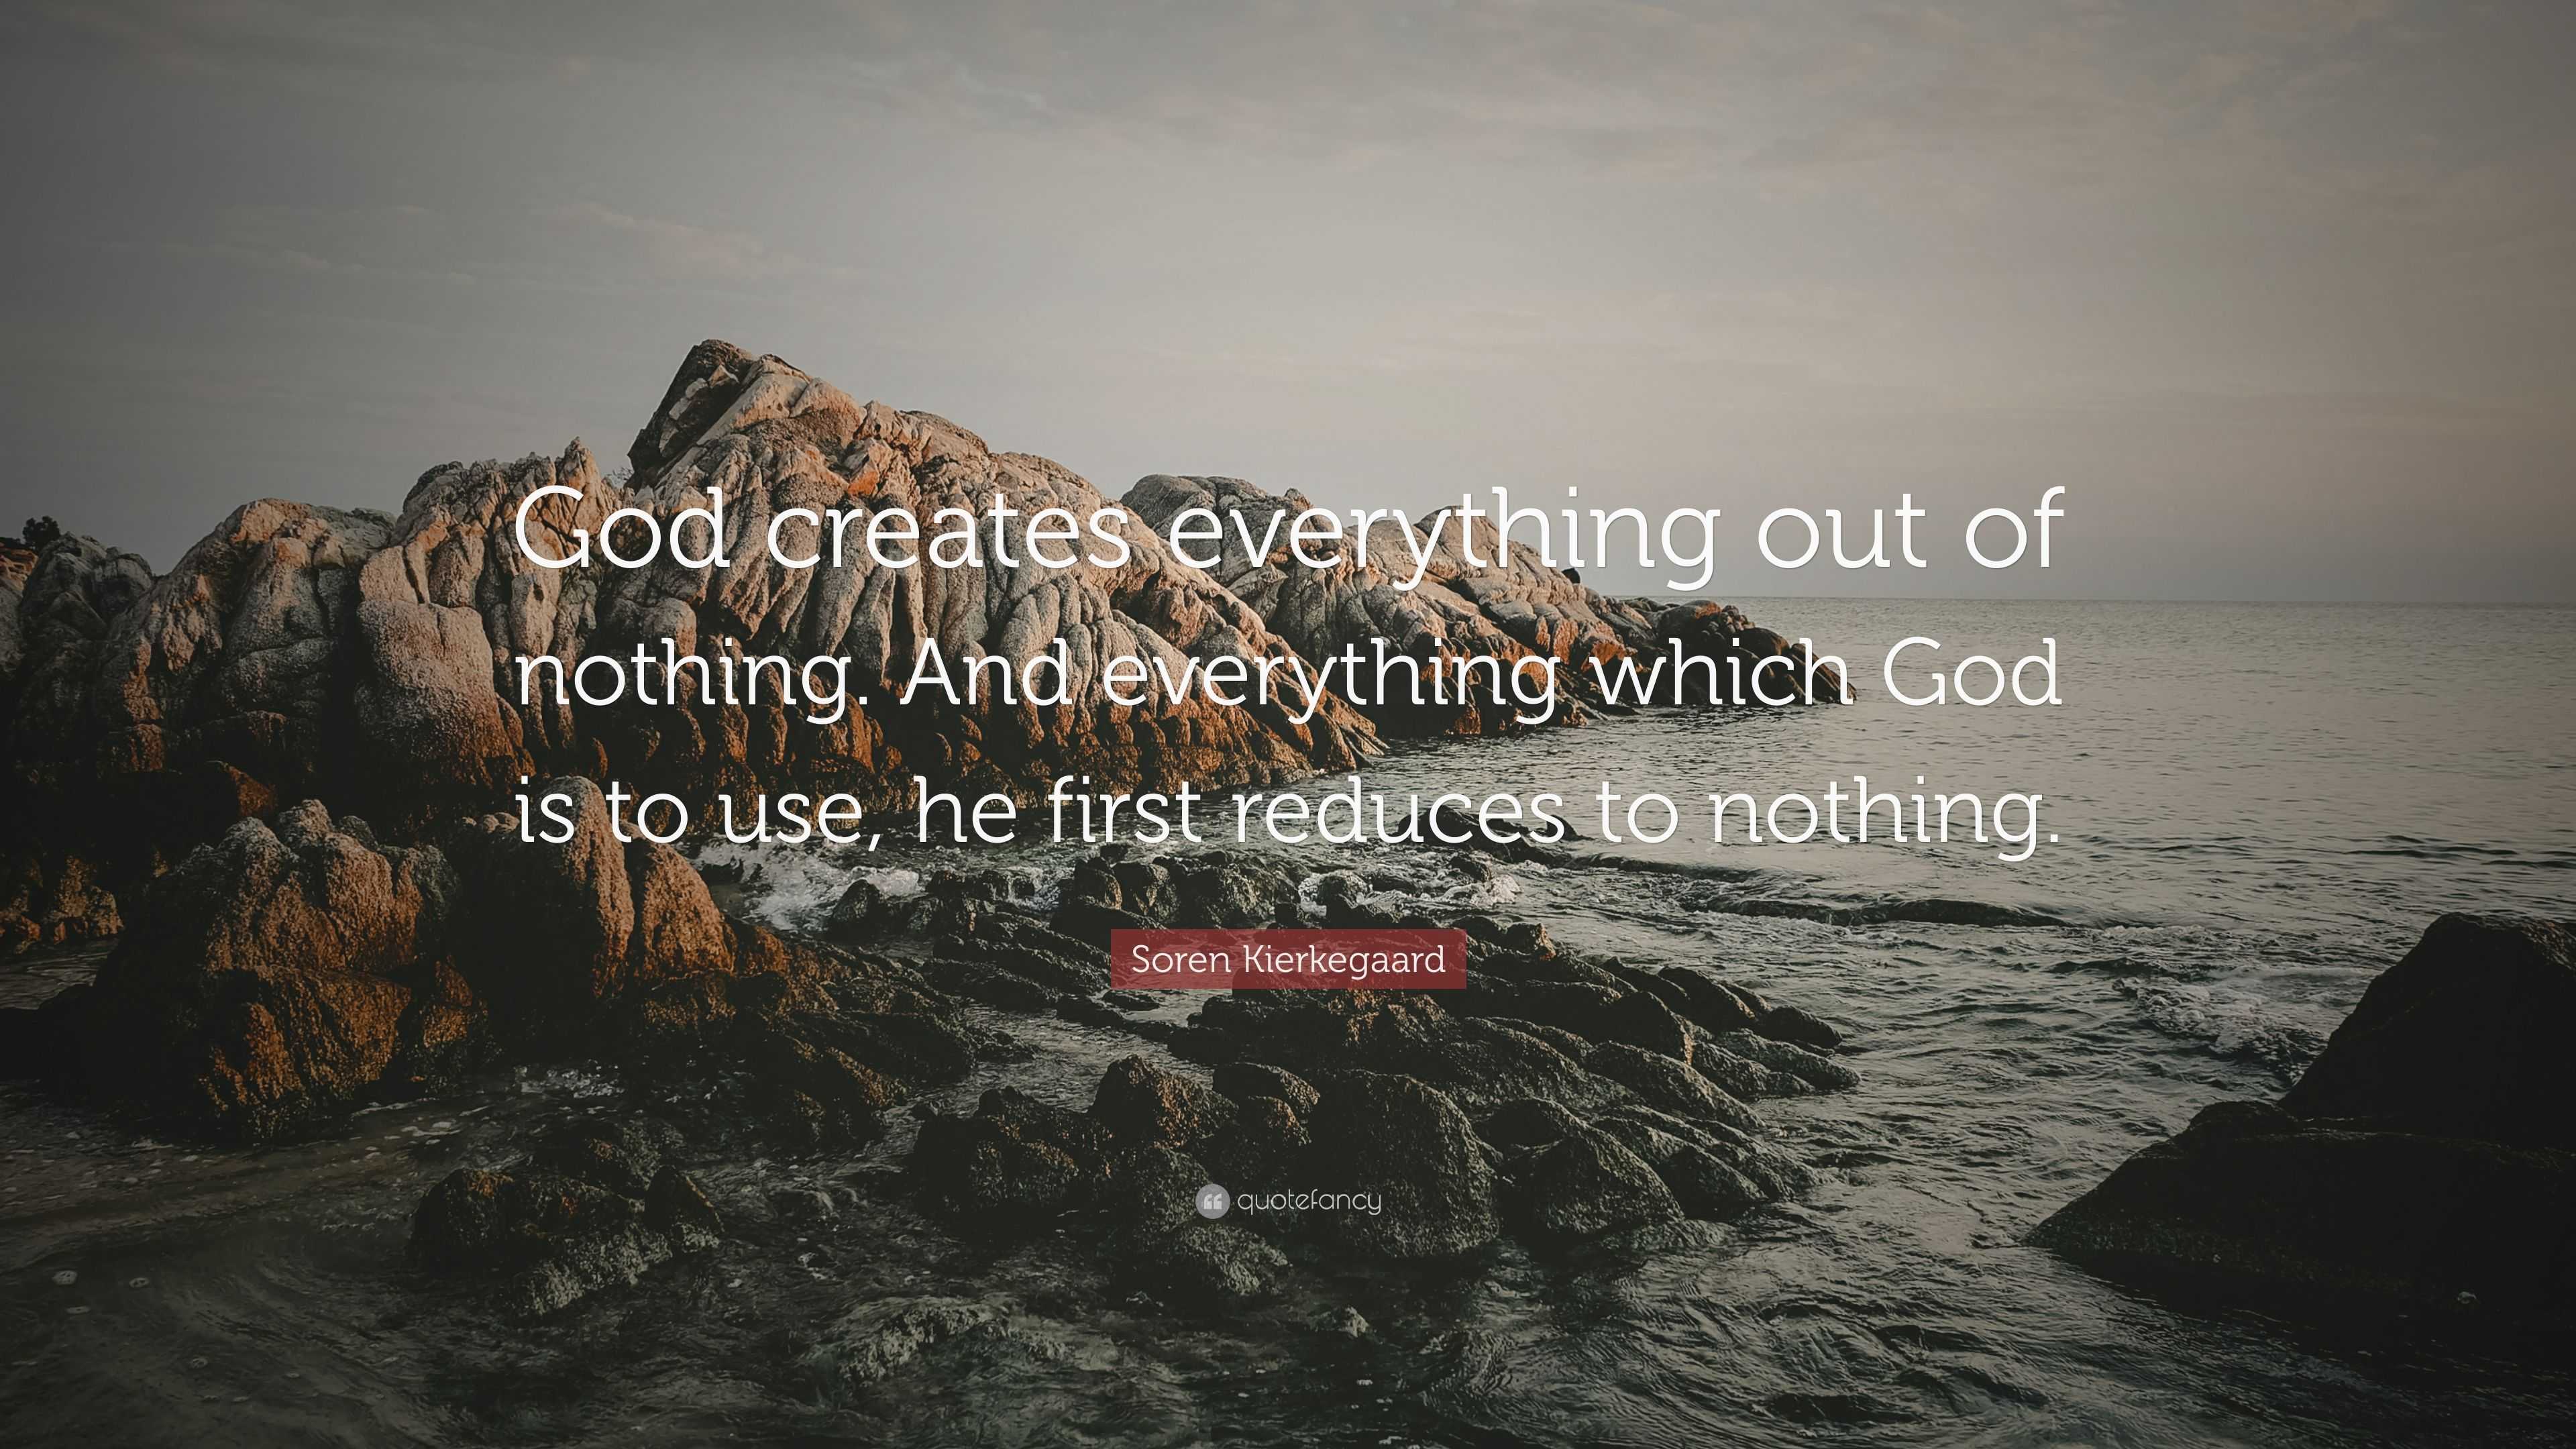 Soren Kierkegaard Quote “God creates everything out of nothing And everything which God